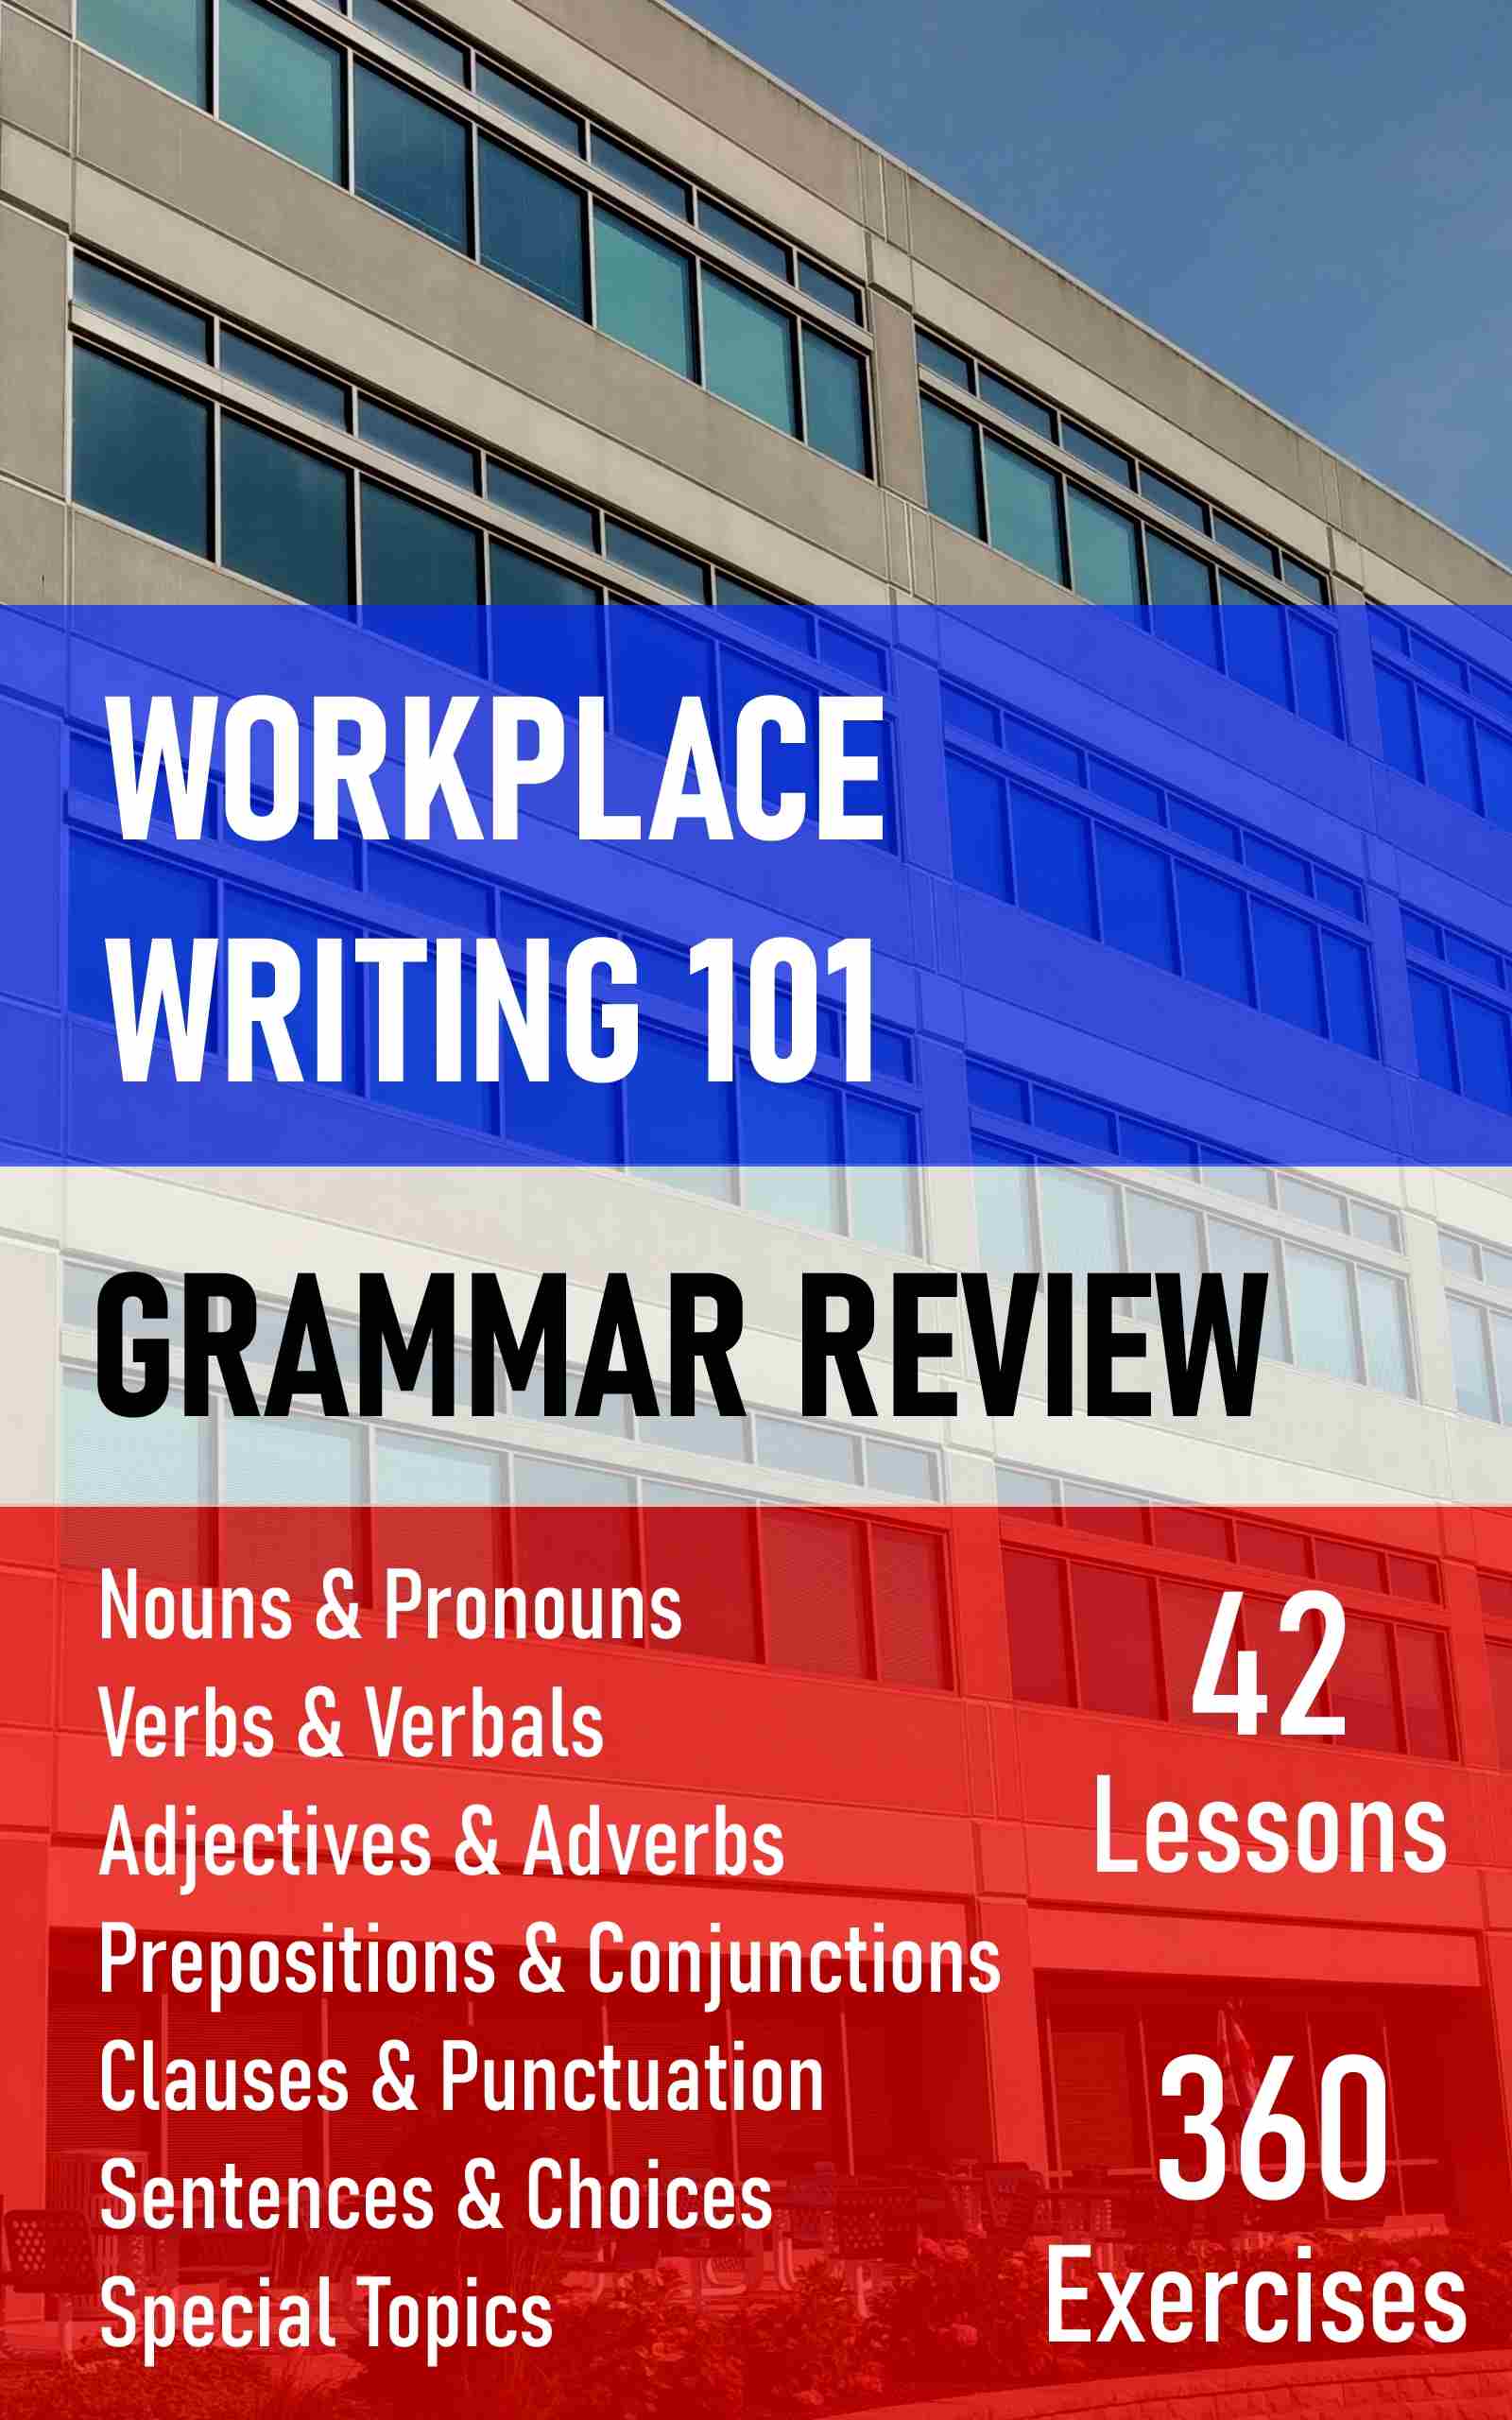 Workplace Writing 101 - Grammar Review